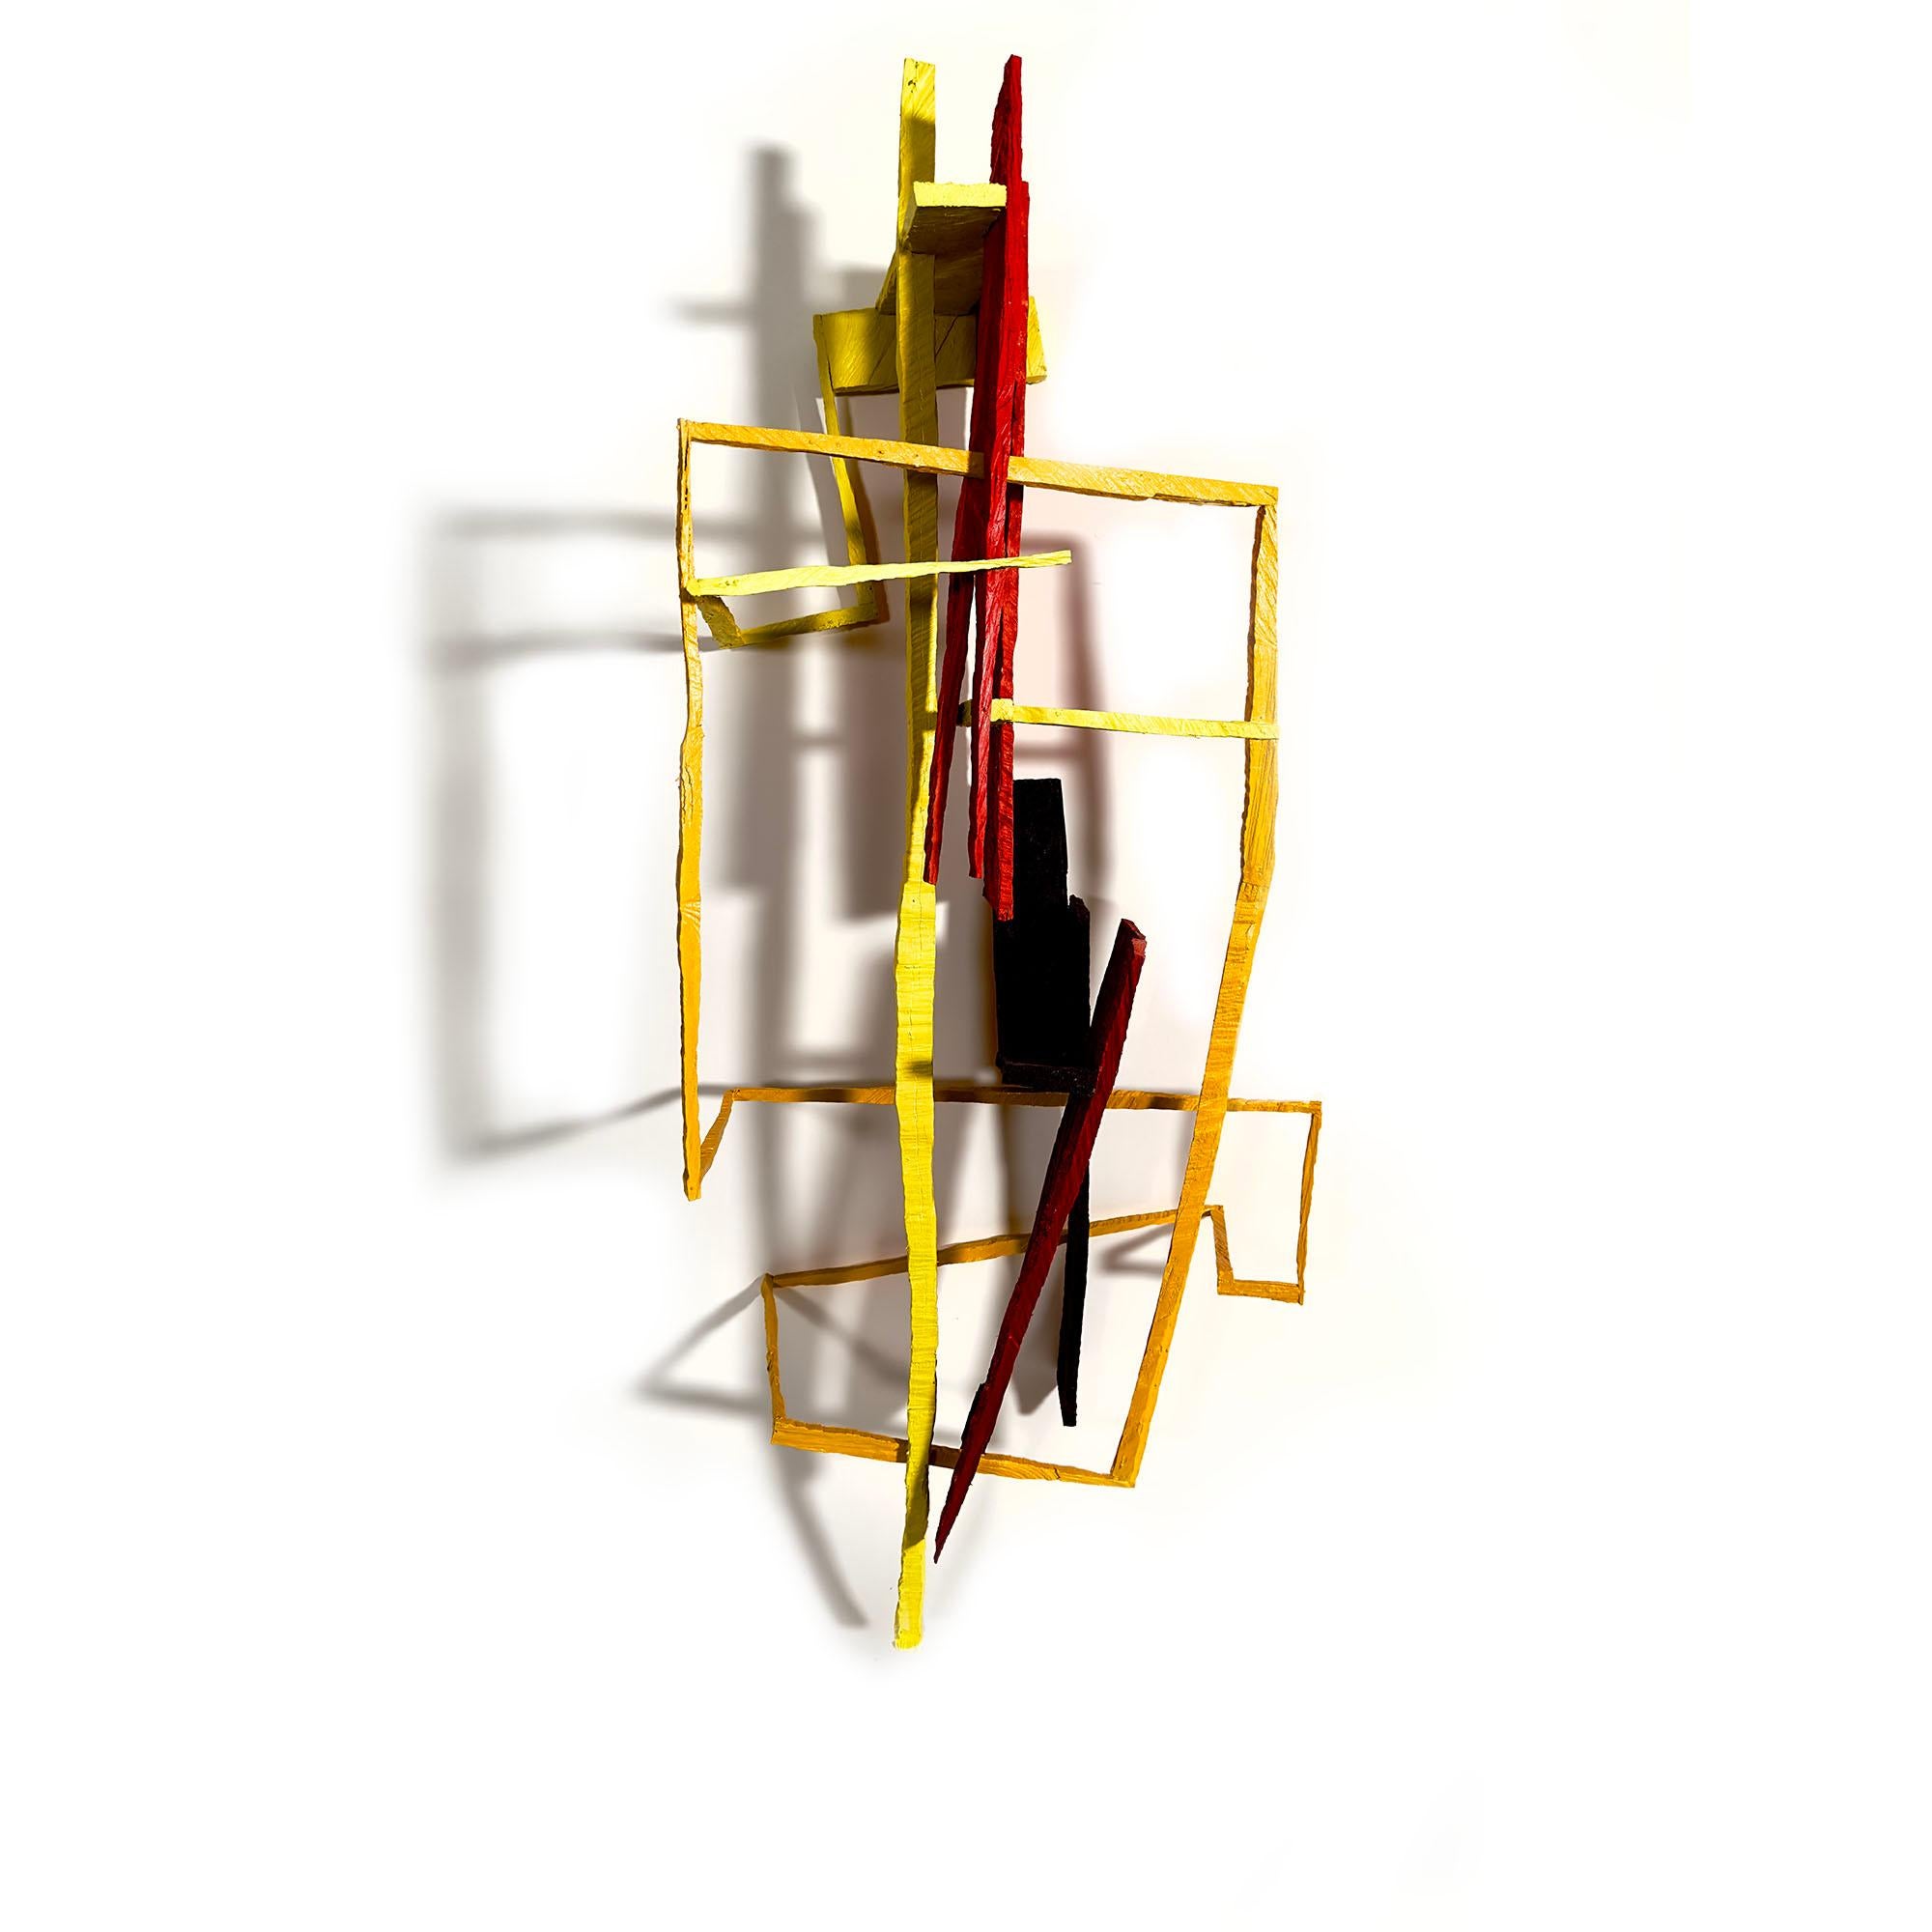 Joe Sultan Abstract Sculpture - Now You See It, abstract geometric wooden sculpture